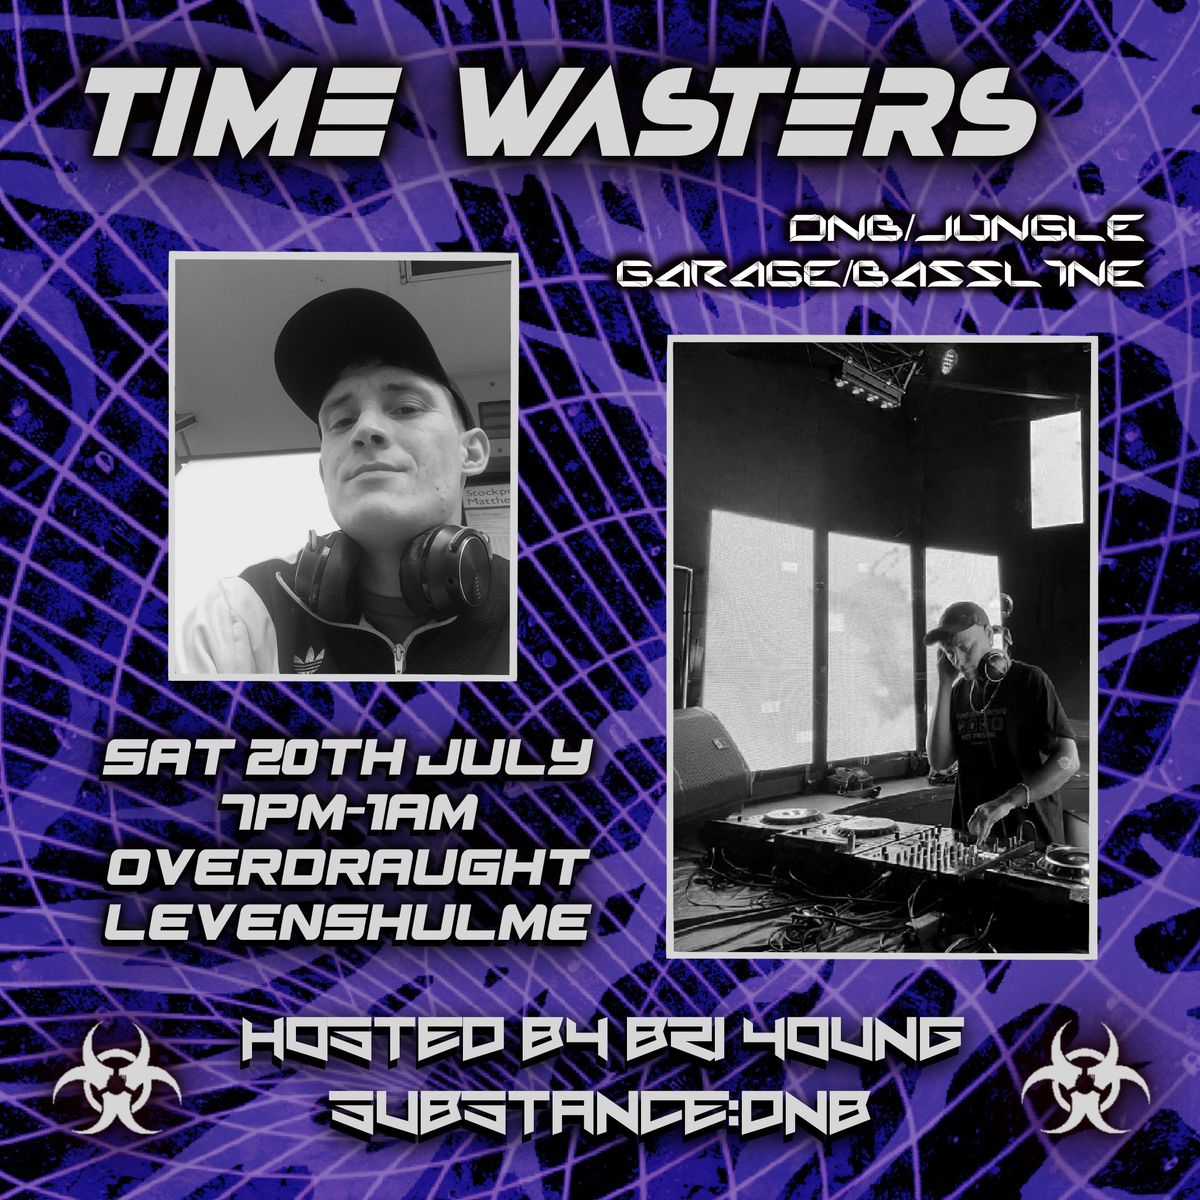 TIME WASTERS \/ GARAGE \/ BASSLINE \/ DNB \/ JUNGLE \/ MANCHESTER EDITION